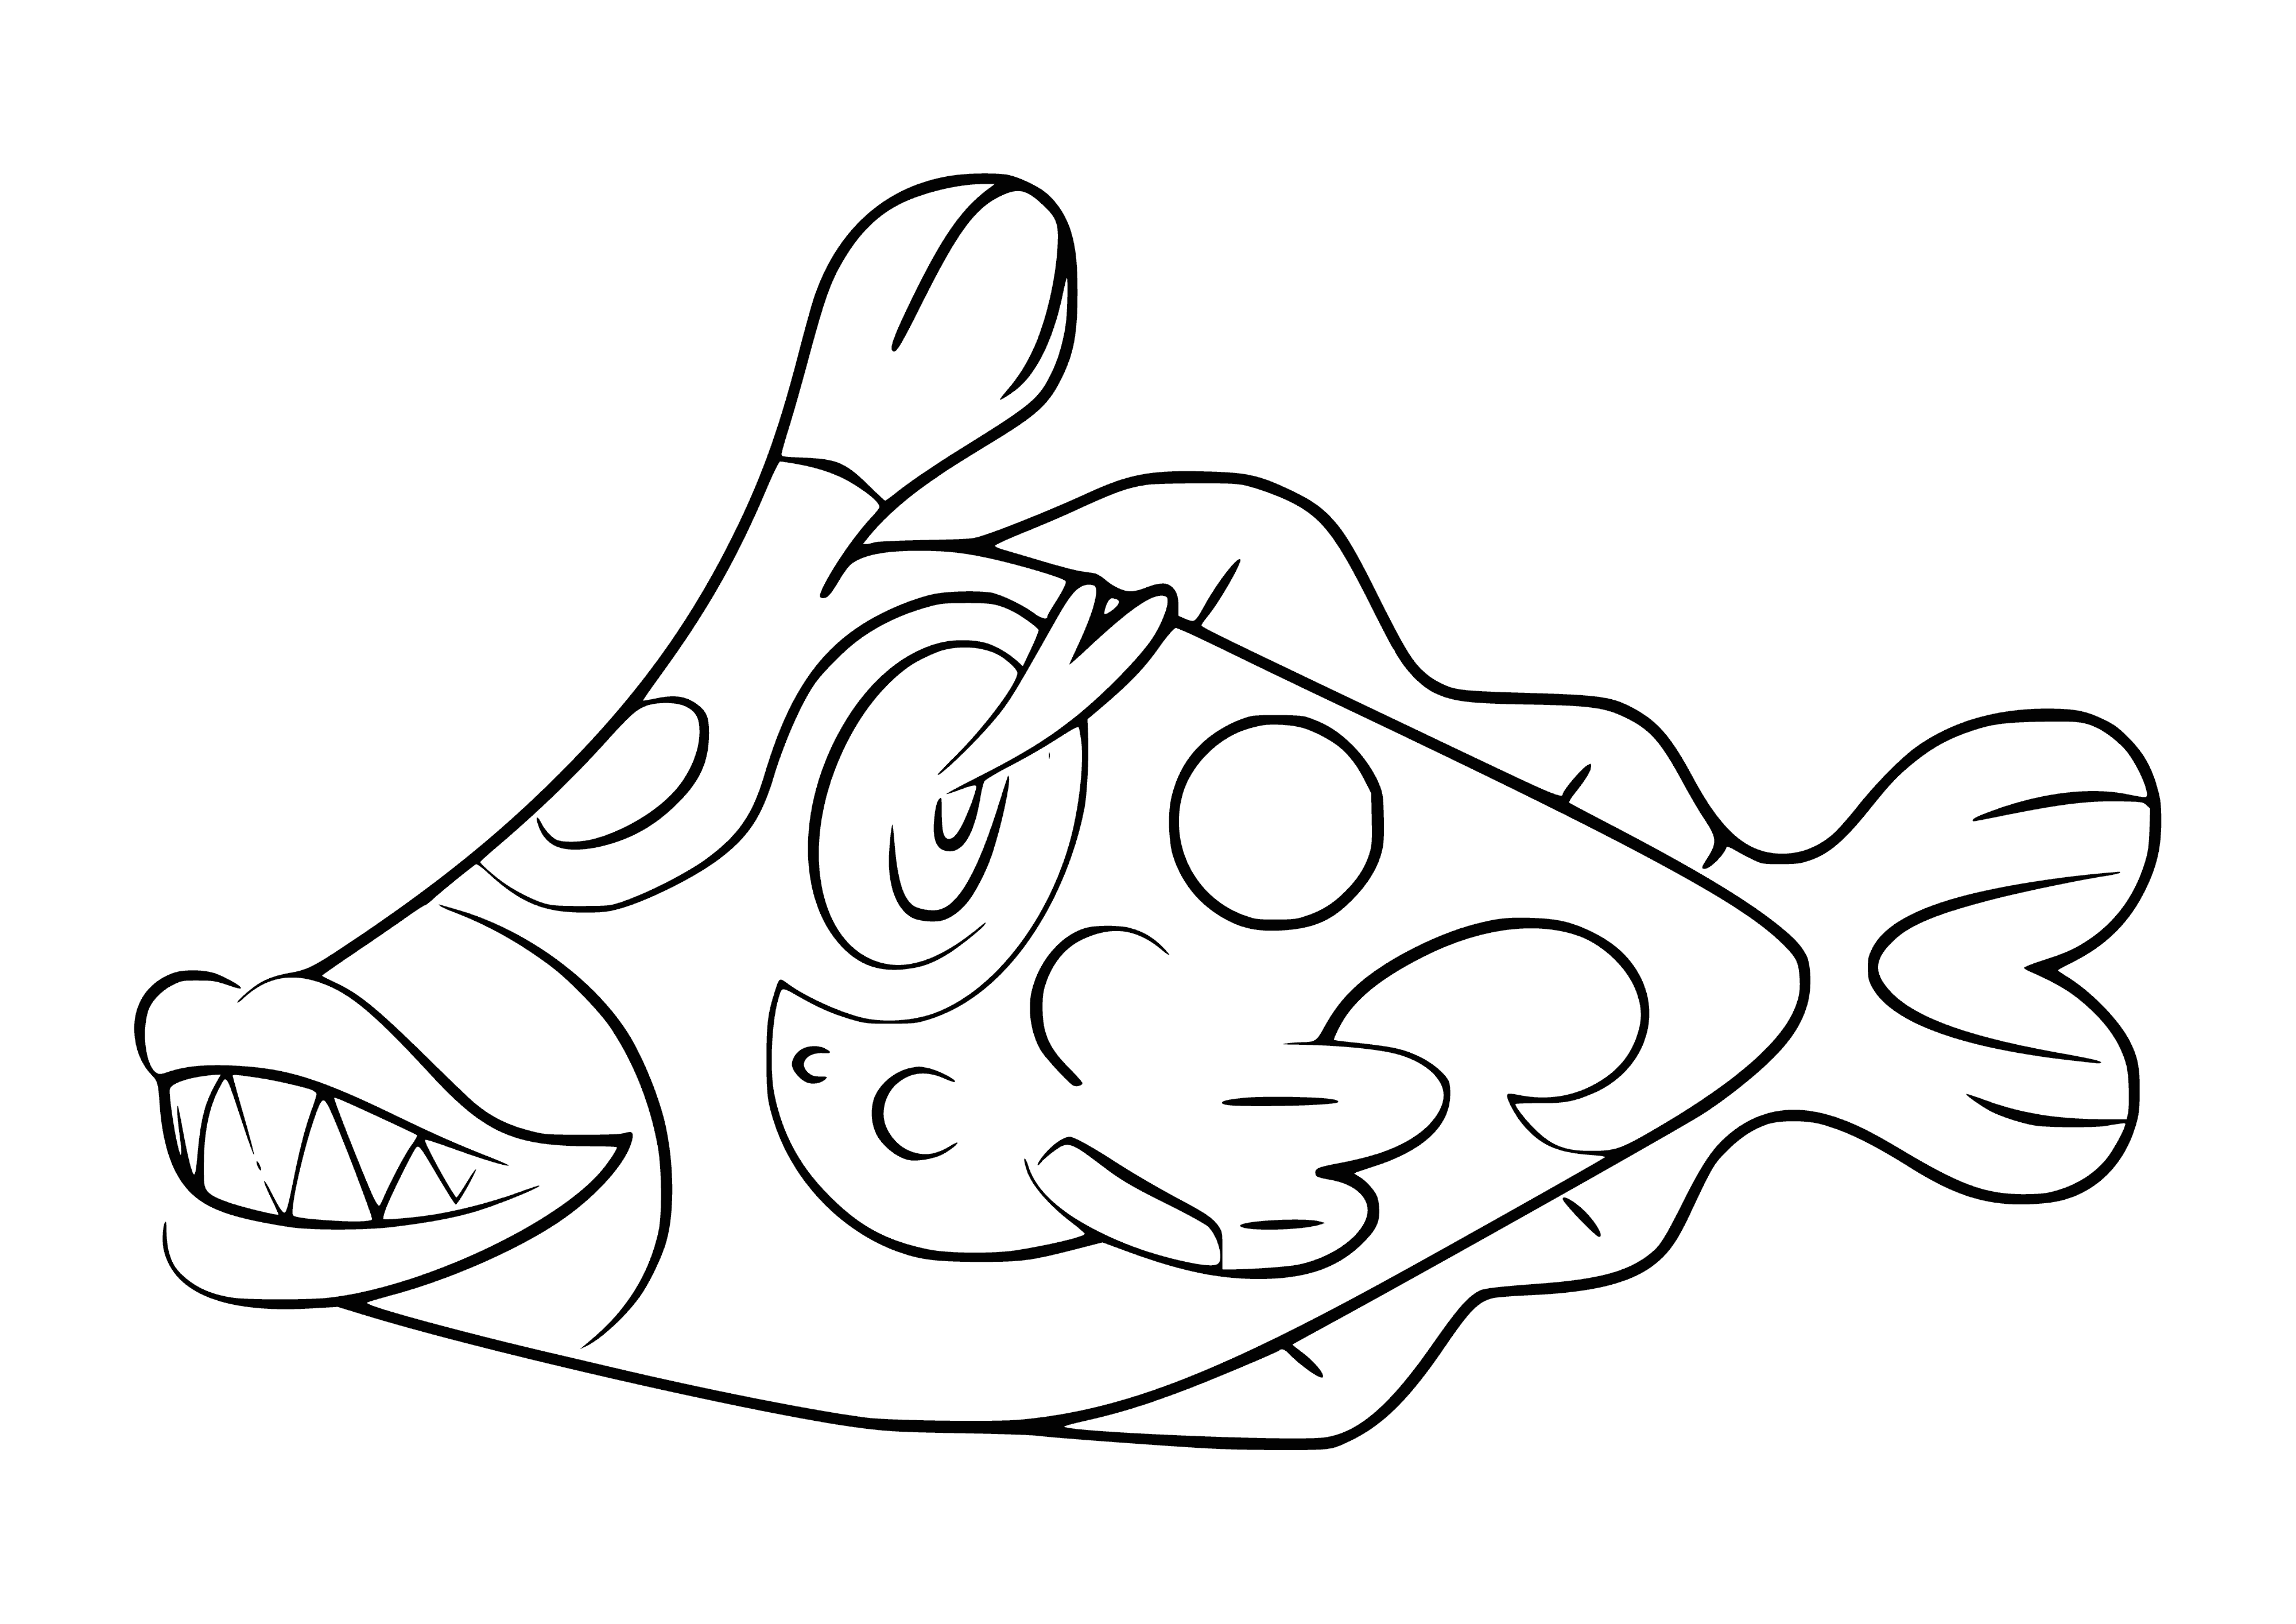 coloring page: Slender, orange-and-white Pokémon with rounded head, blue-pupiled eyes, two long fins plus shorter one on belly, fan-like orange tail.